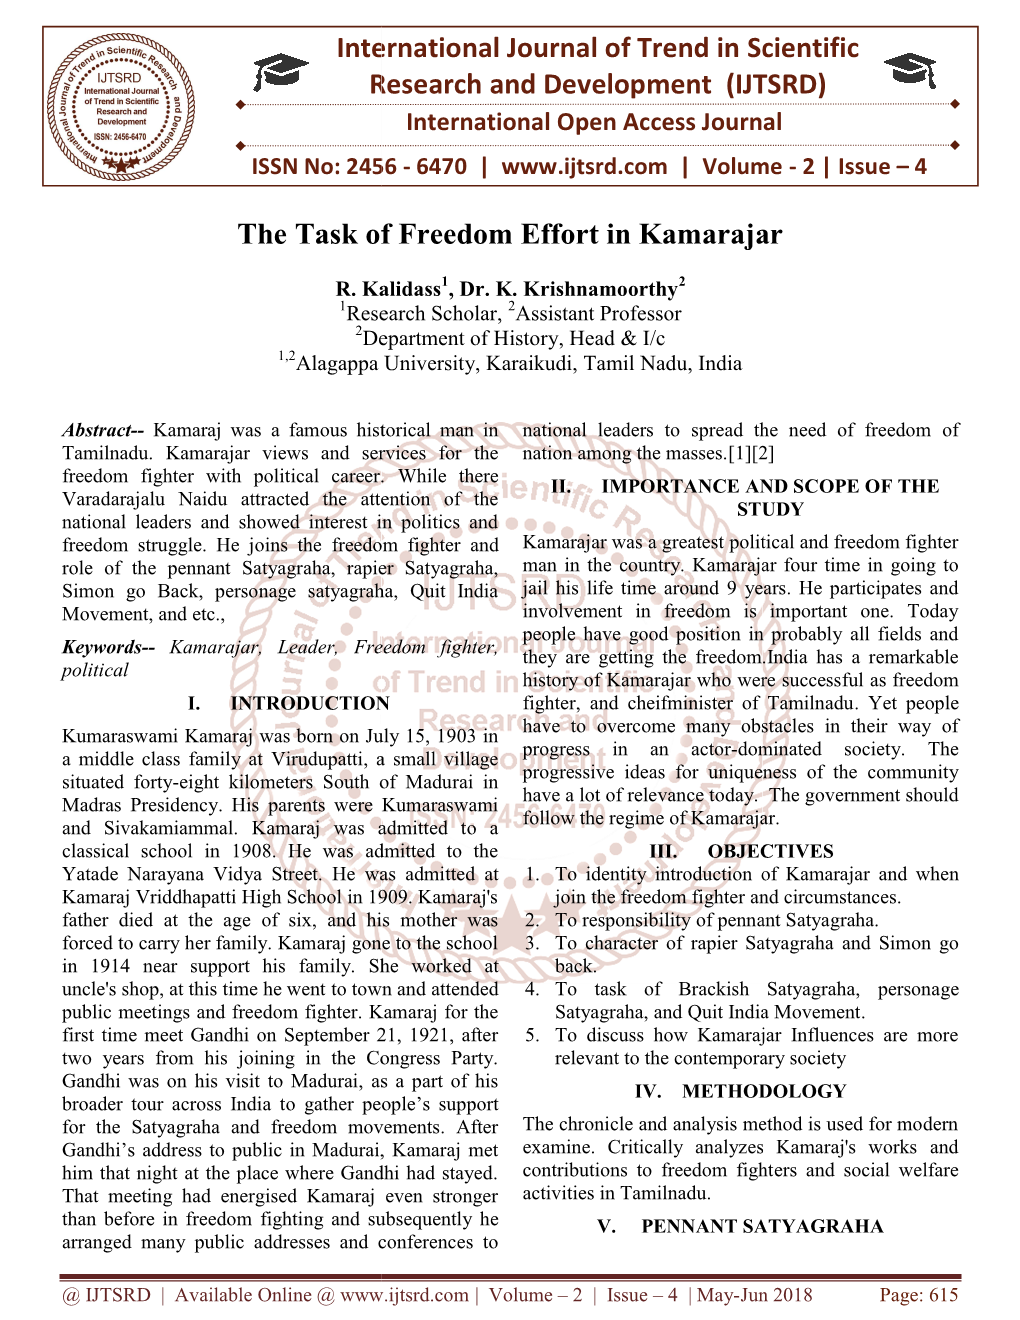 International Research the Task of Freedom E International Journal Of